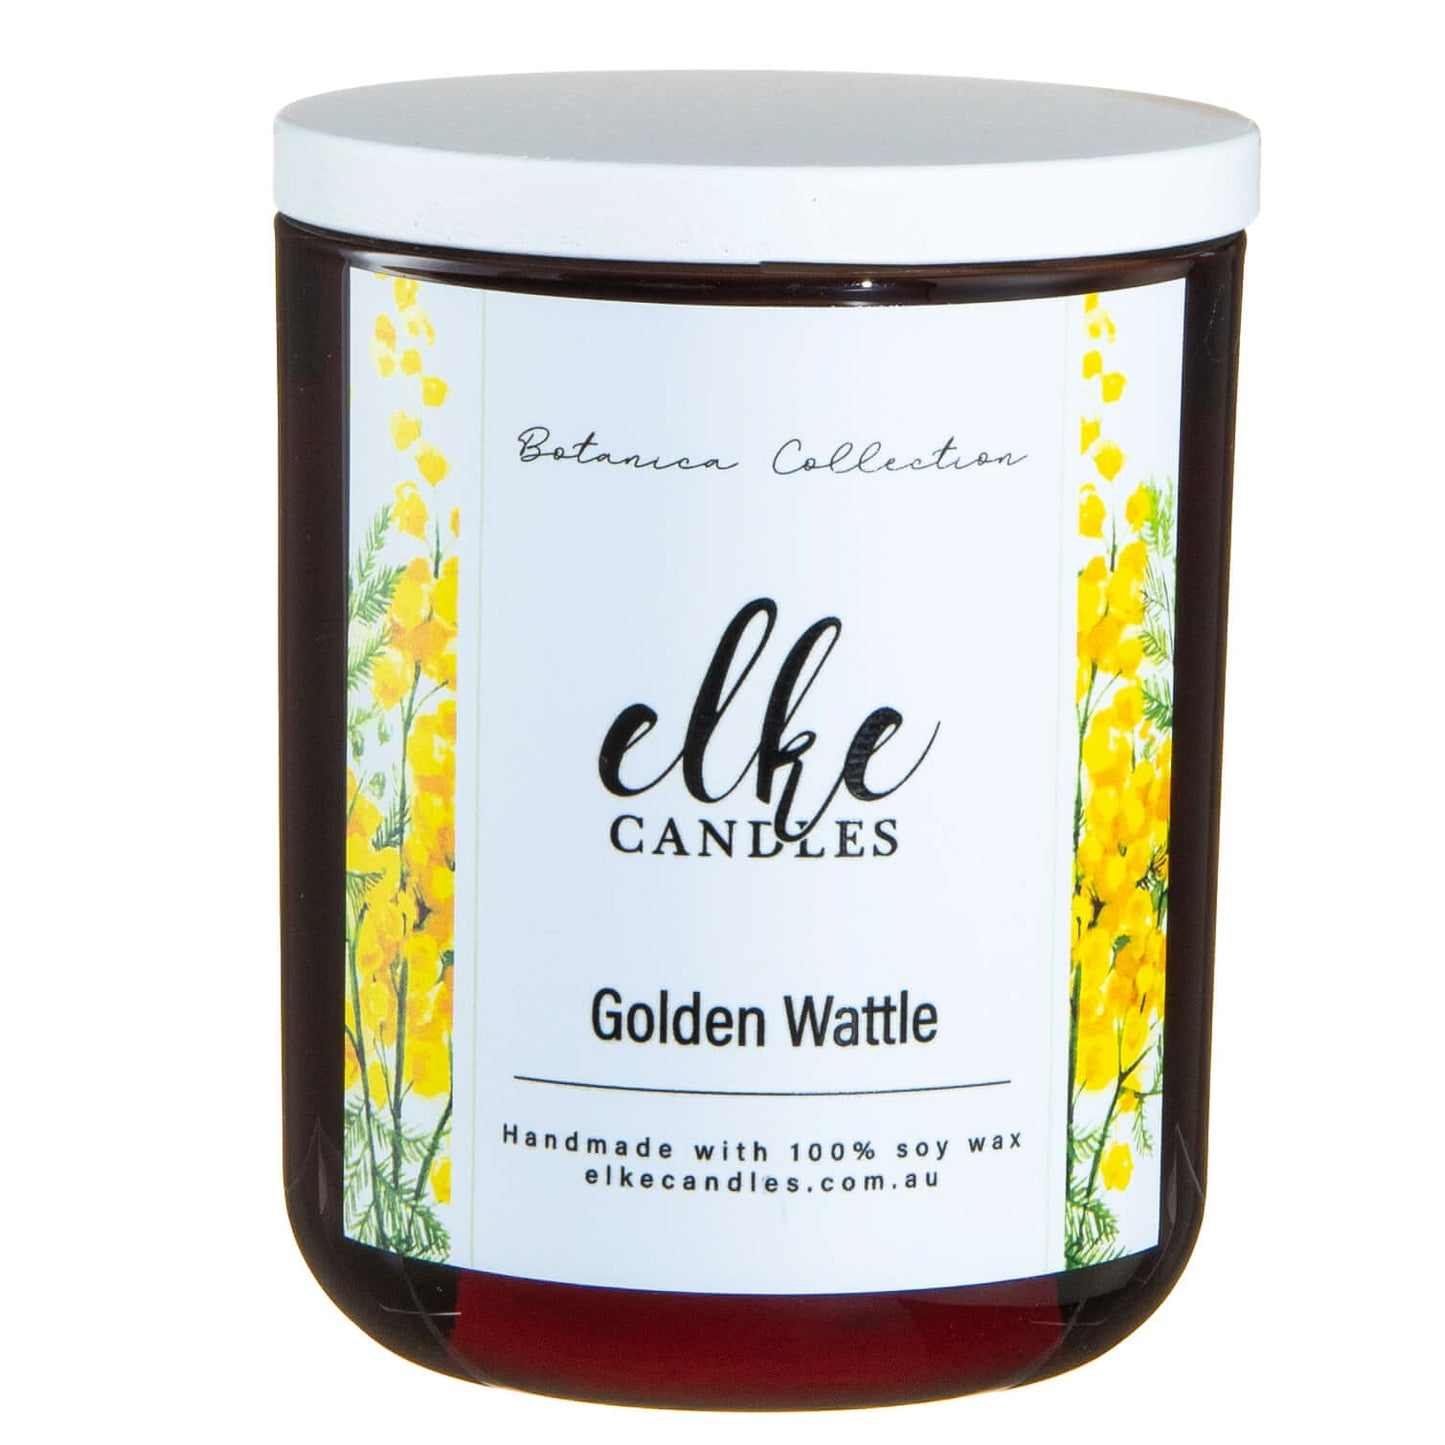 Botanica Collection Large Soy Candle